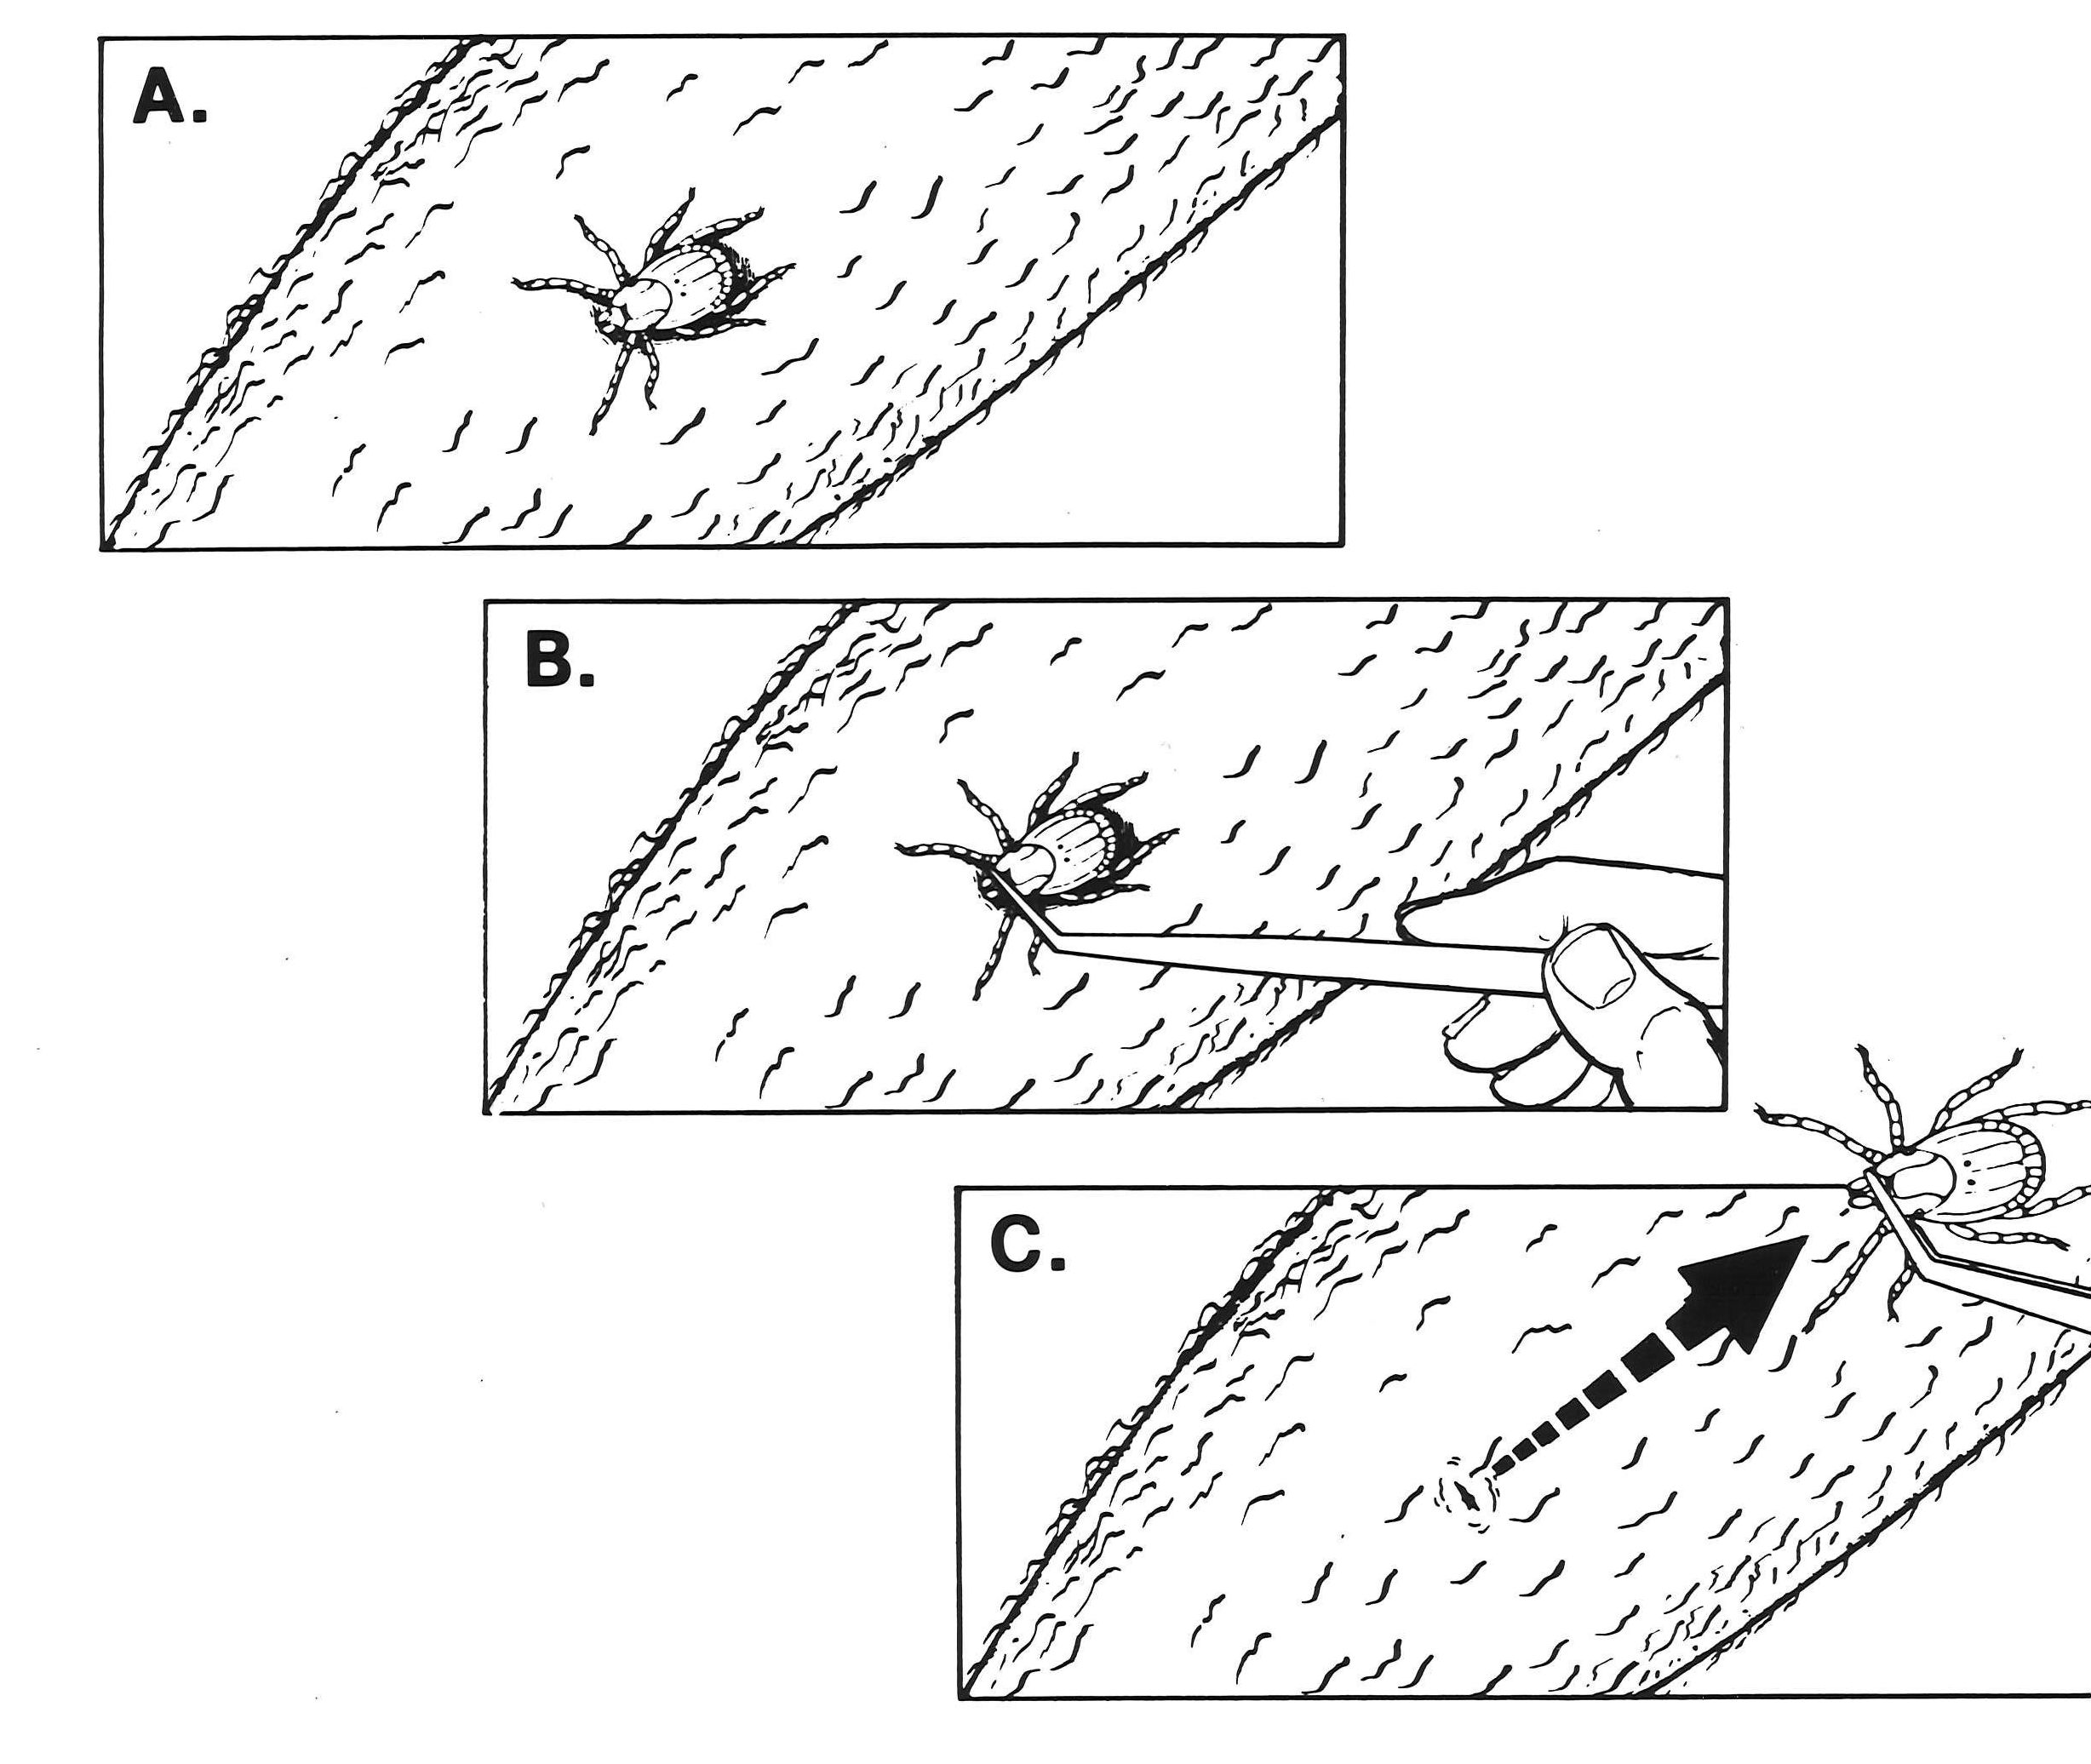 Diagram of removing a tick. A person grasps the tick right at the skin with tweezers and pulls it straight back to remove.